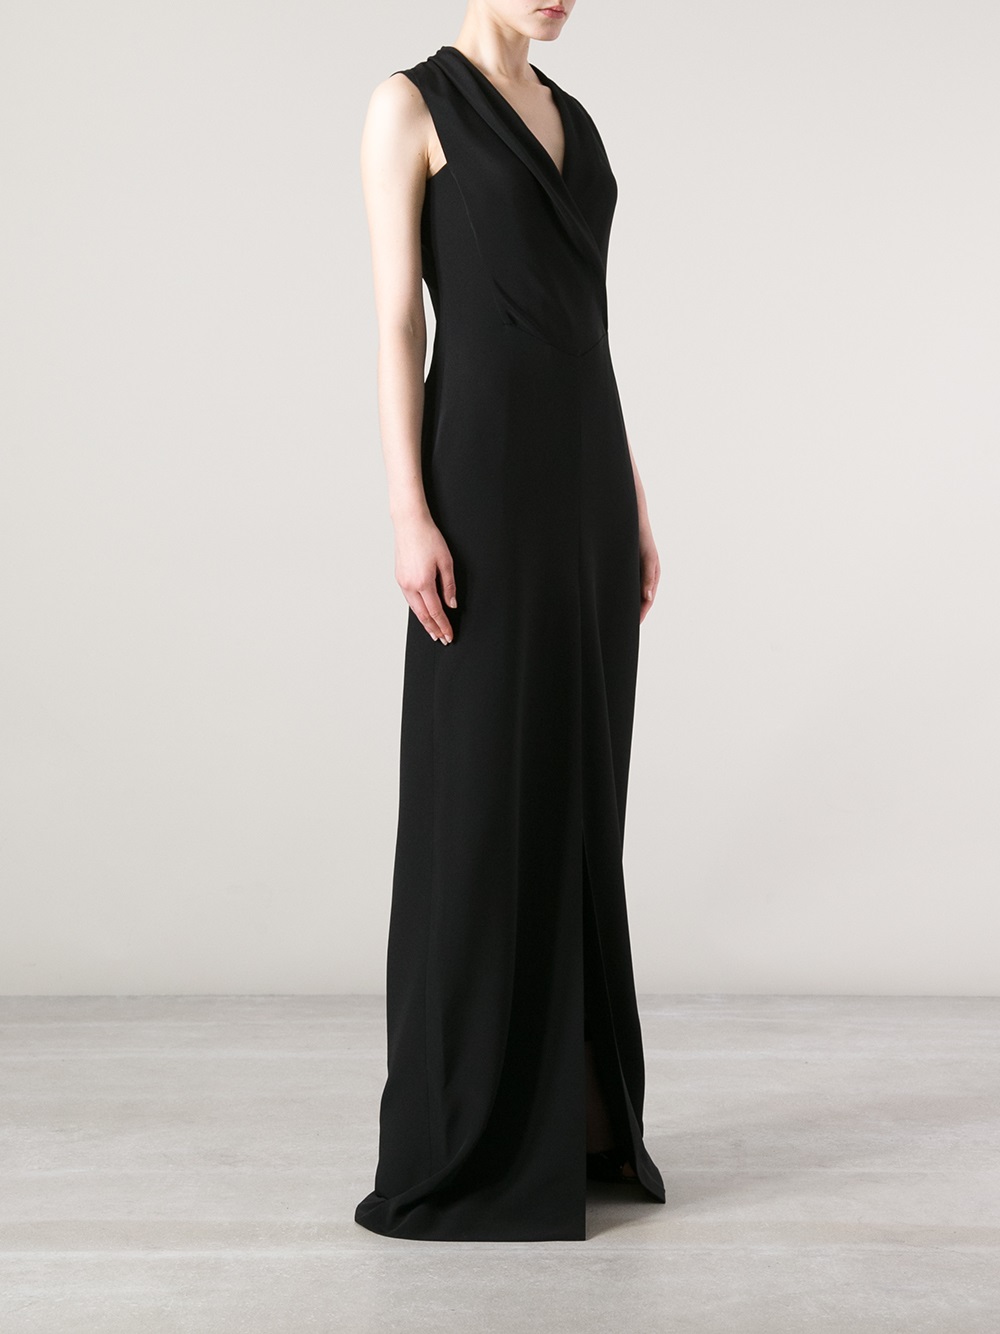 Givenchy Givenchy Sleeveless Dress in Black - Lyst